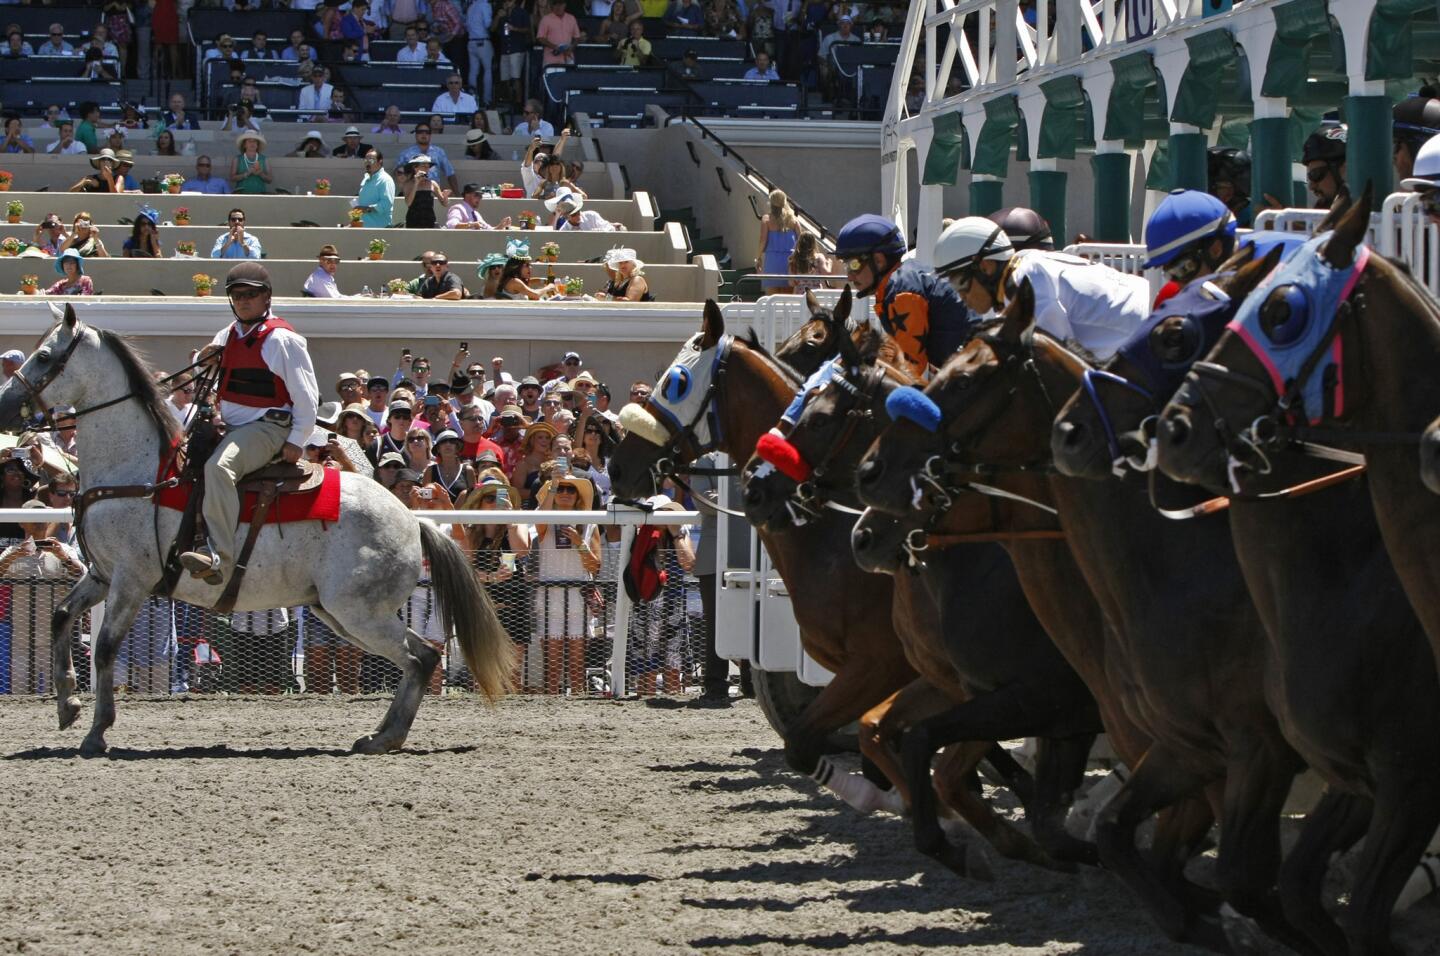 Horses break from the gate for the first race of the 2014 season at the Del Mar racetrack.